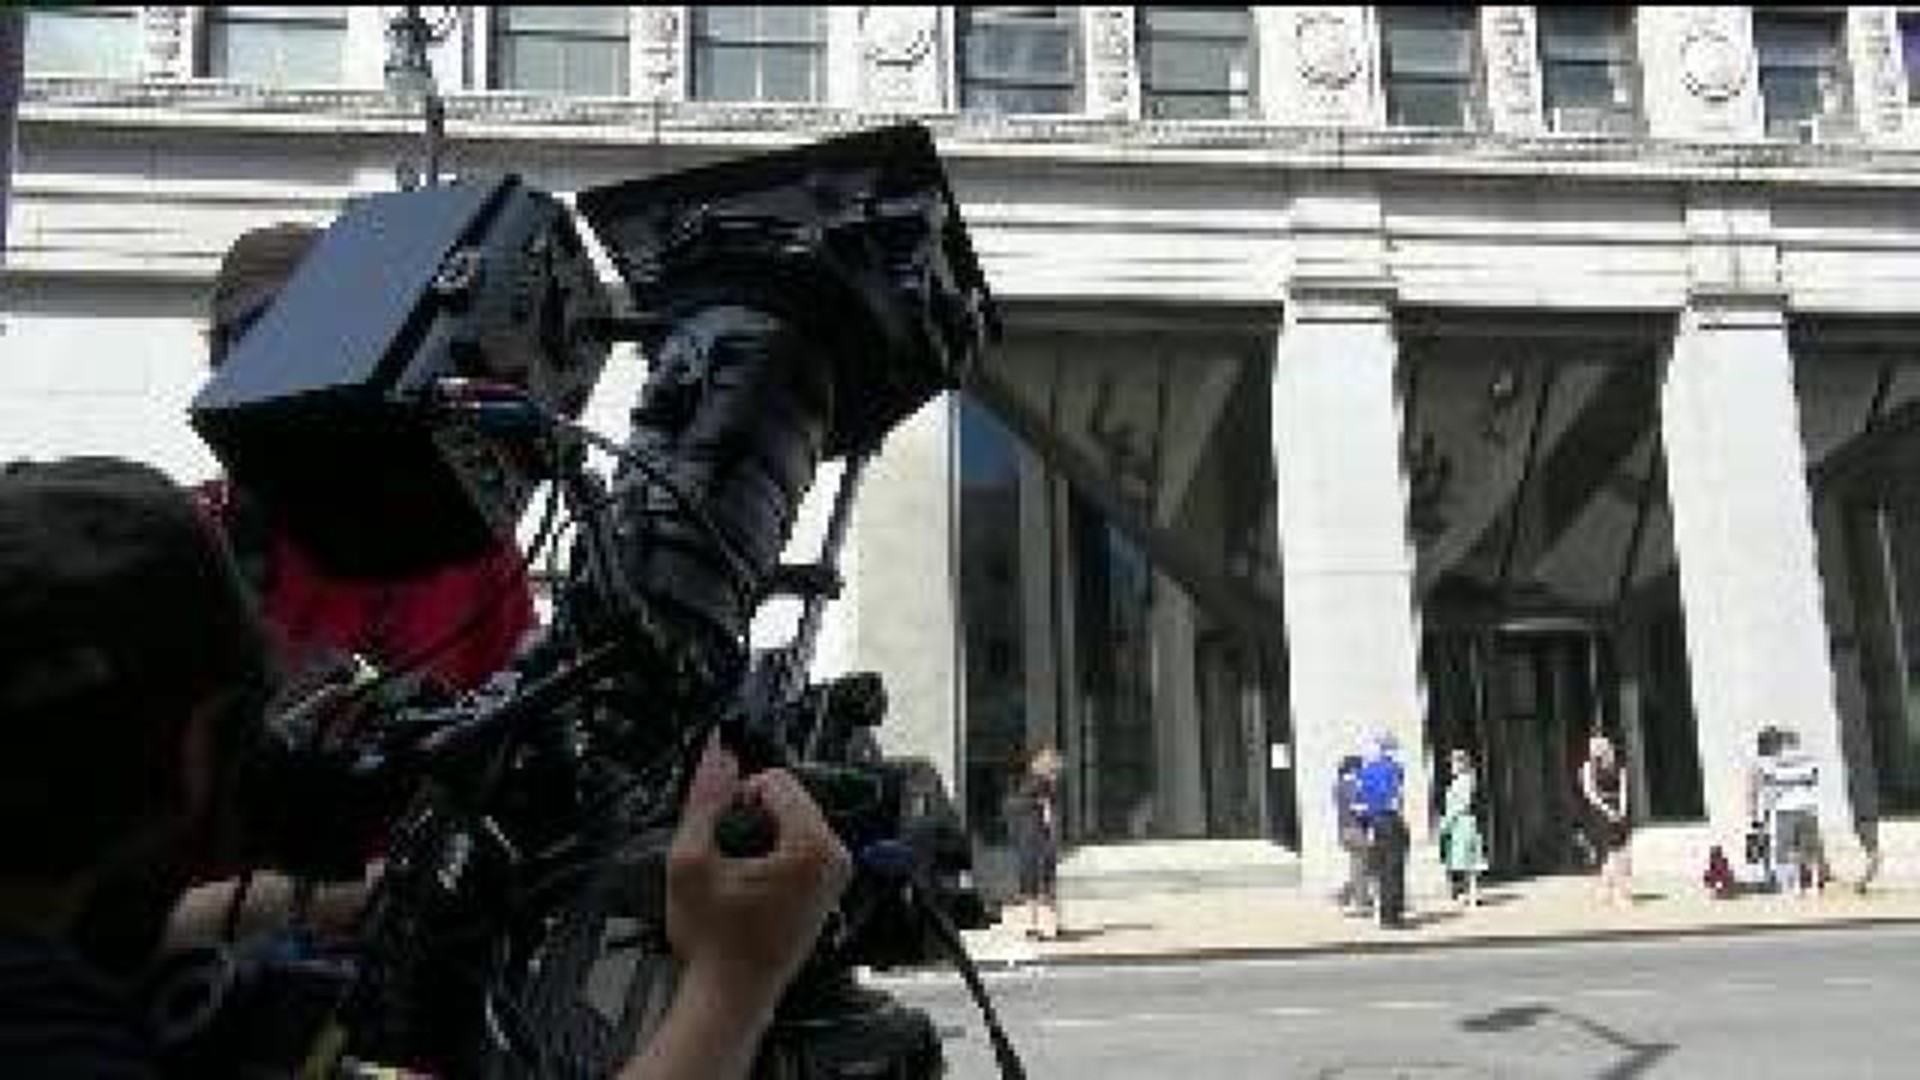 Film Crew Uses Local Buildings As NYC Backdrop